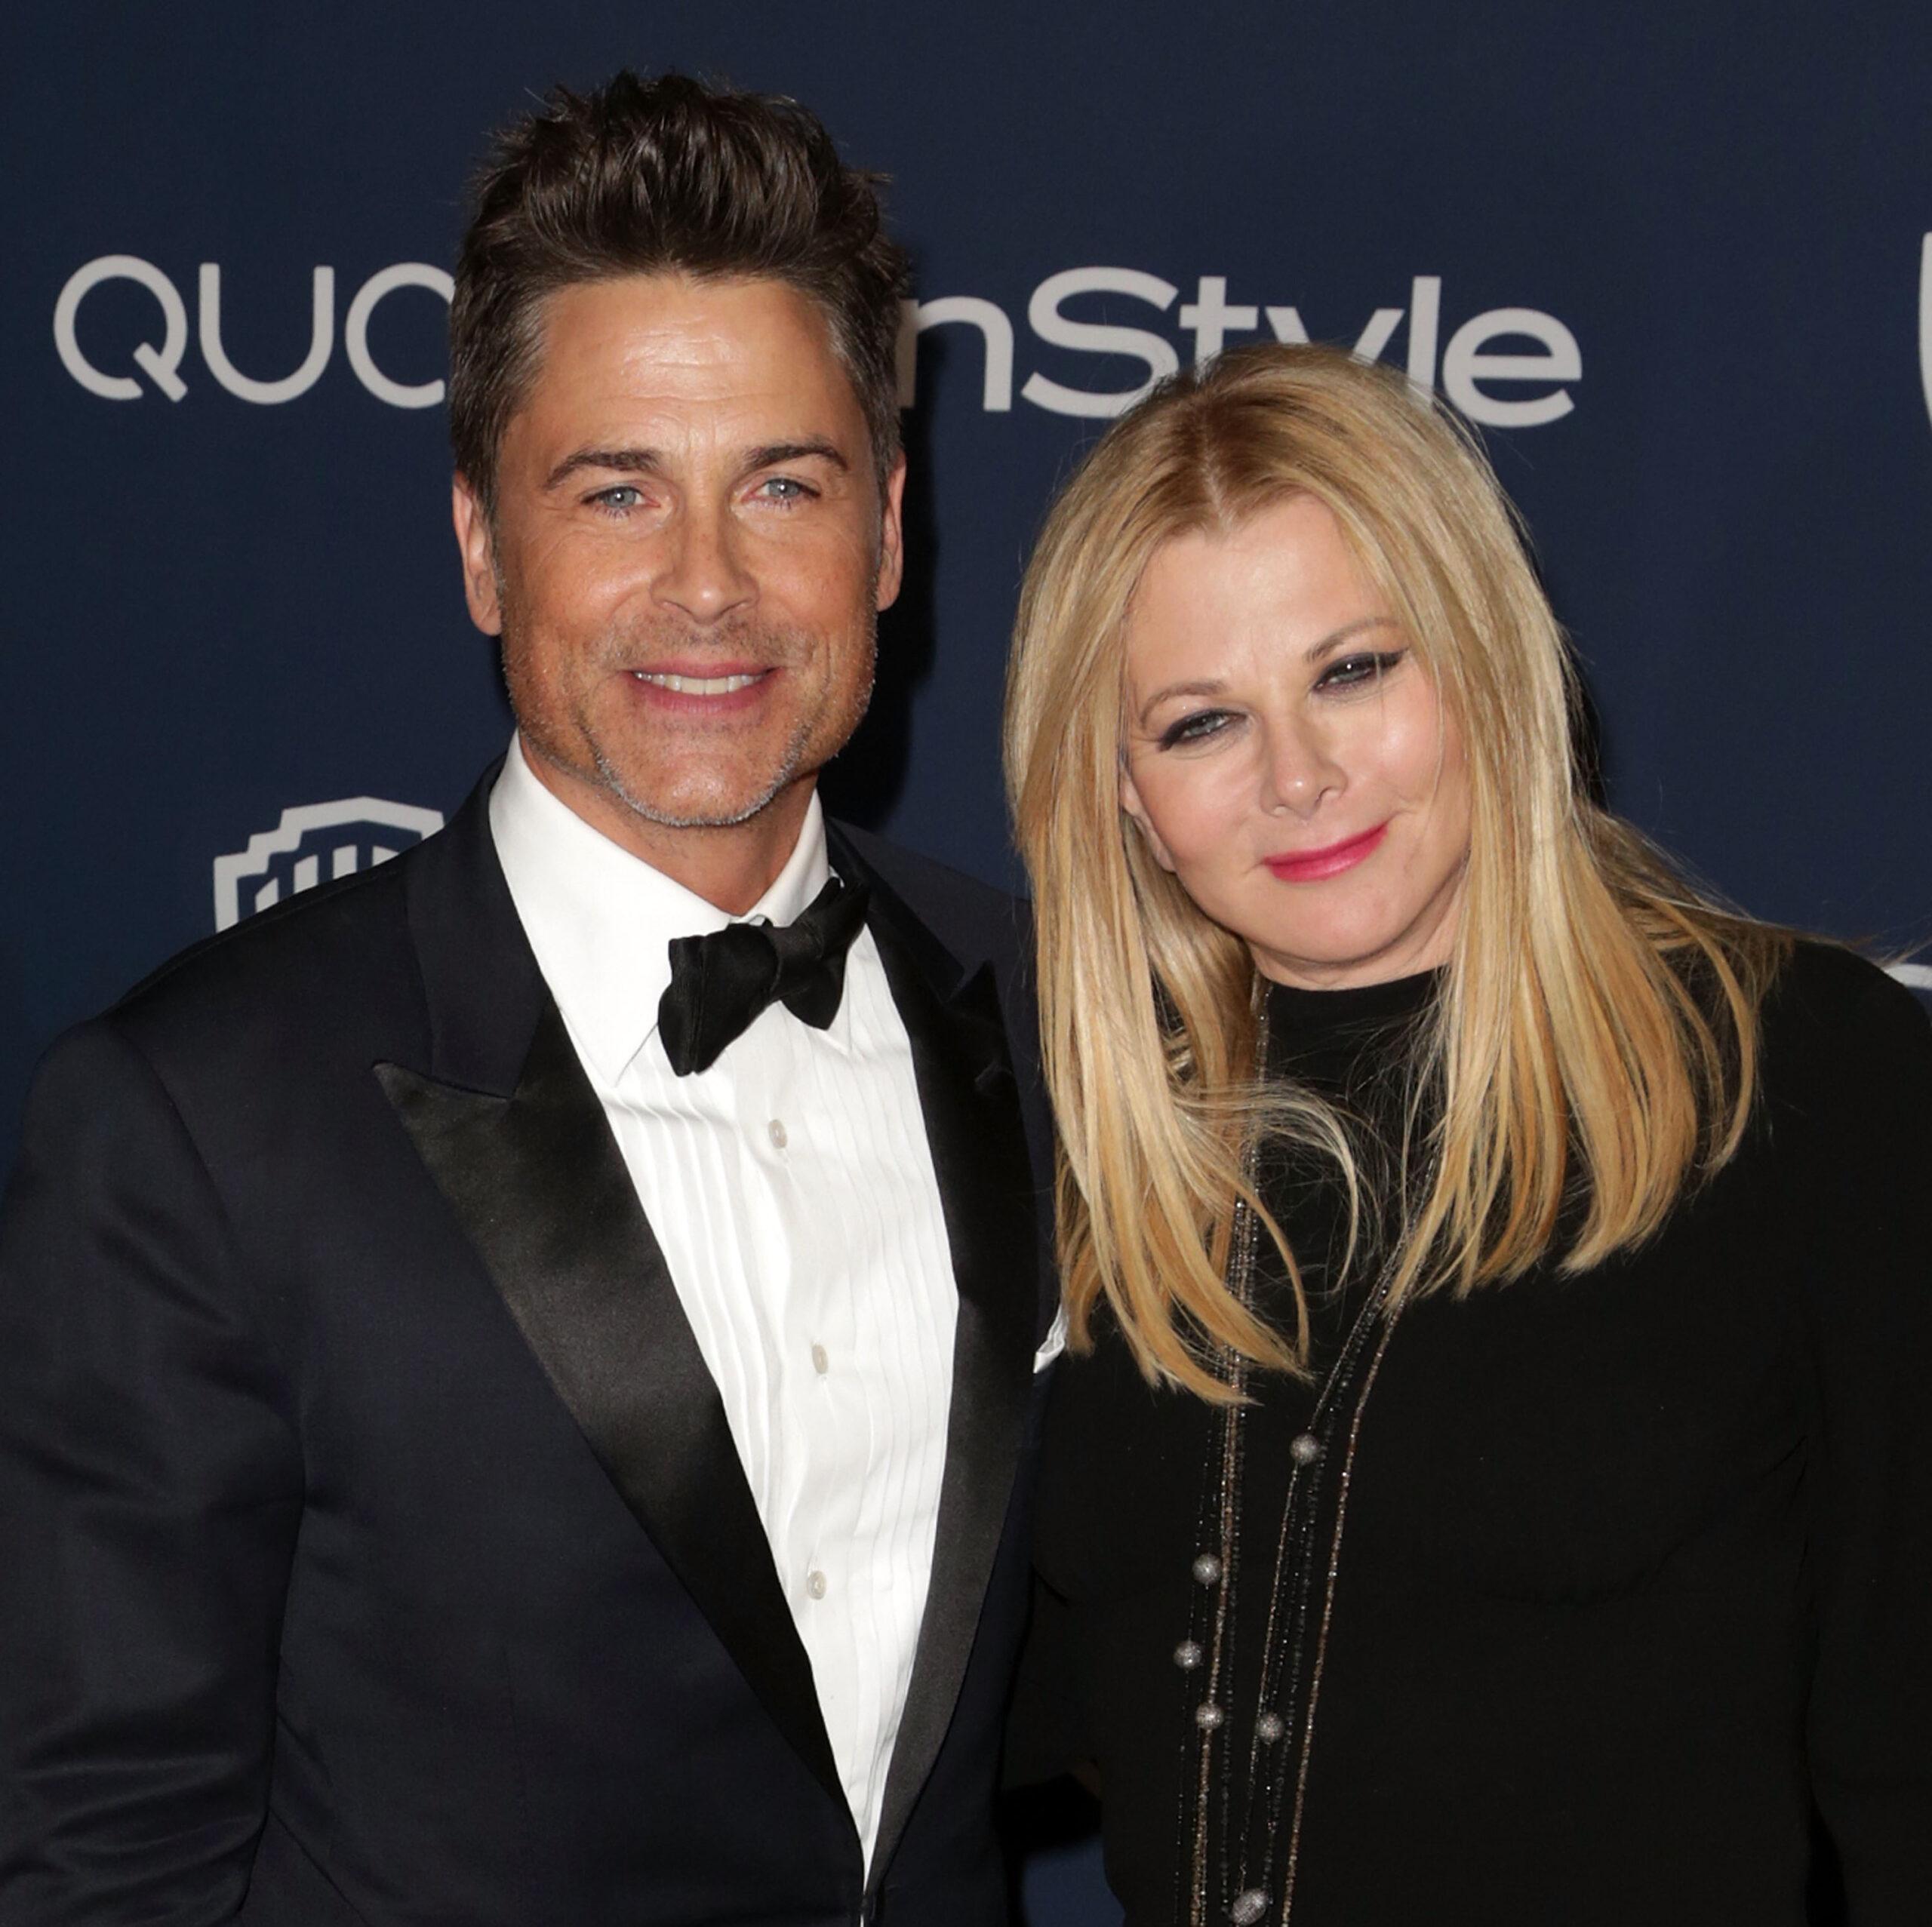 Rob Lowe and Sheryl Berkoff at the 15th Annual Warner Bros And InStyle Golden Globe Awards After Party